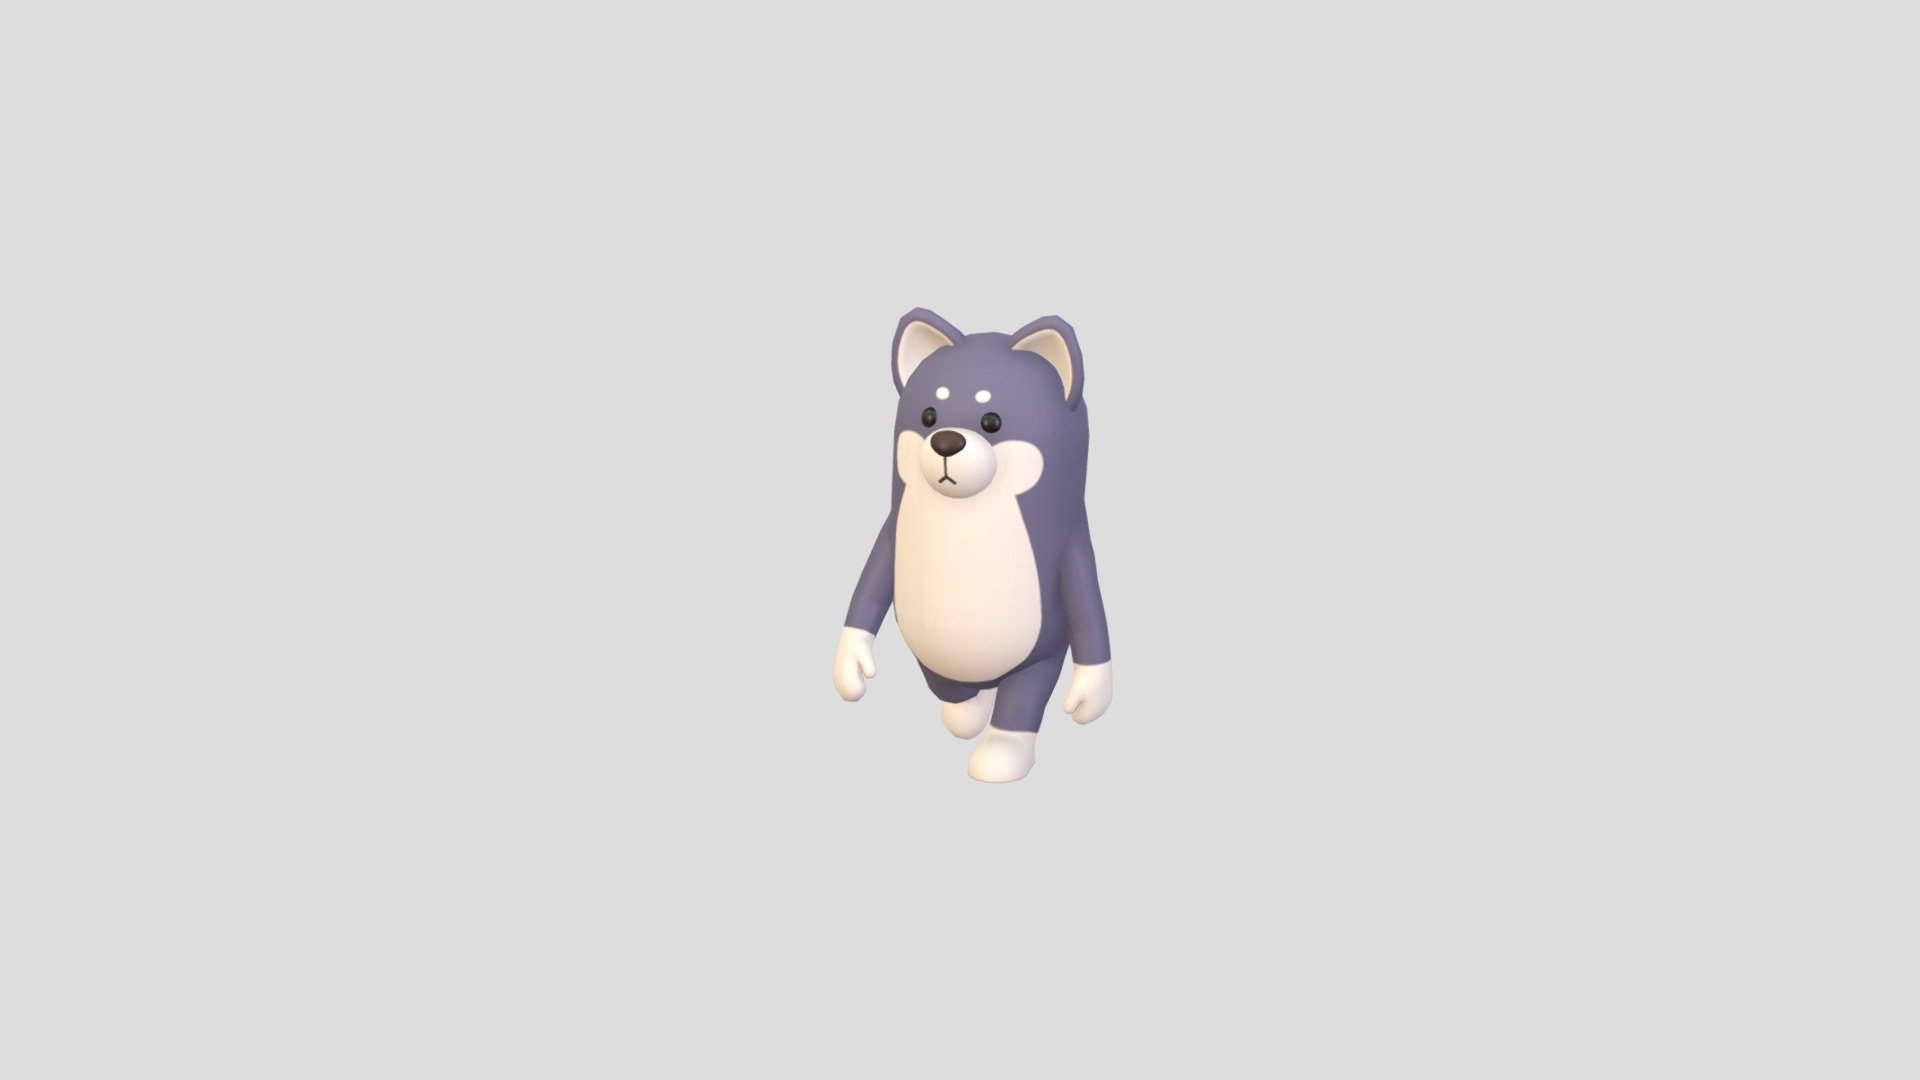 Rigged Wolf Character 3d model.      
    


File Formats      
 
- 3ds max 2023 (Rigged With CAT)  
 
- FBX  (Rigged) 
 
- OBJ  (NoRig) 
    


Clean topology    

Body Rigged  

No Facial Rig  or Blendshapes 

No Animations  

Non-overlapping unwrapped UVs        
 


PNG texture               

2048x2048                


- Base Color                        

- Normal                            

- Roughness                         



2,042 polygons                          

2,120 vertexs                          
 - Rigged Wolf Character - Buy Royalty Free 3D model by bariacg 3d model